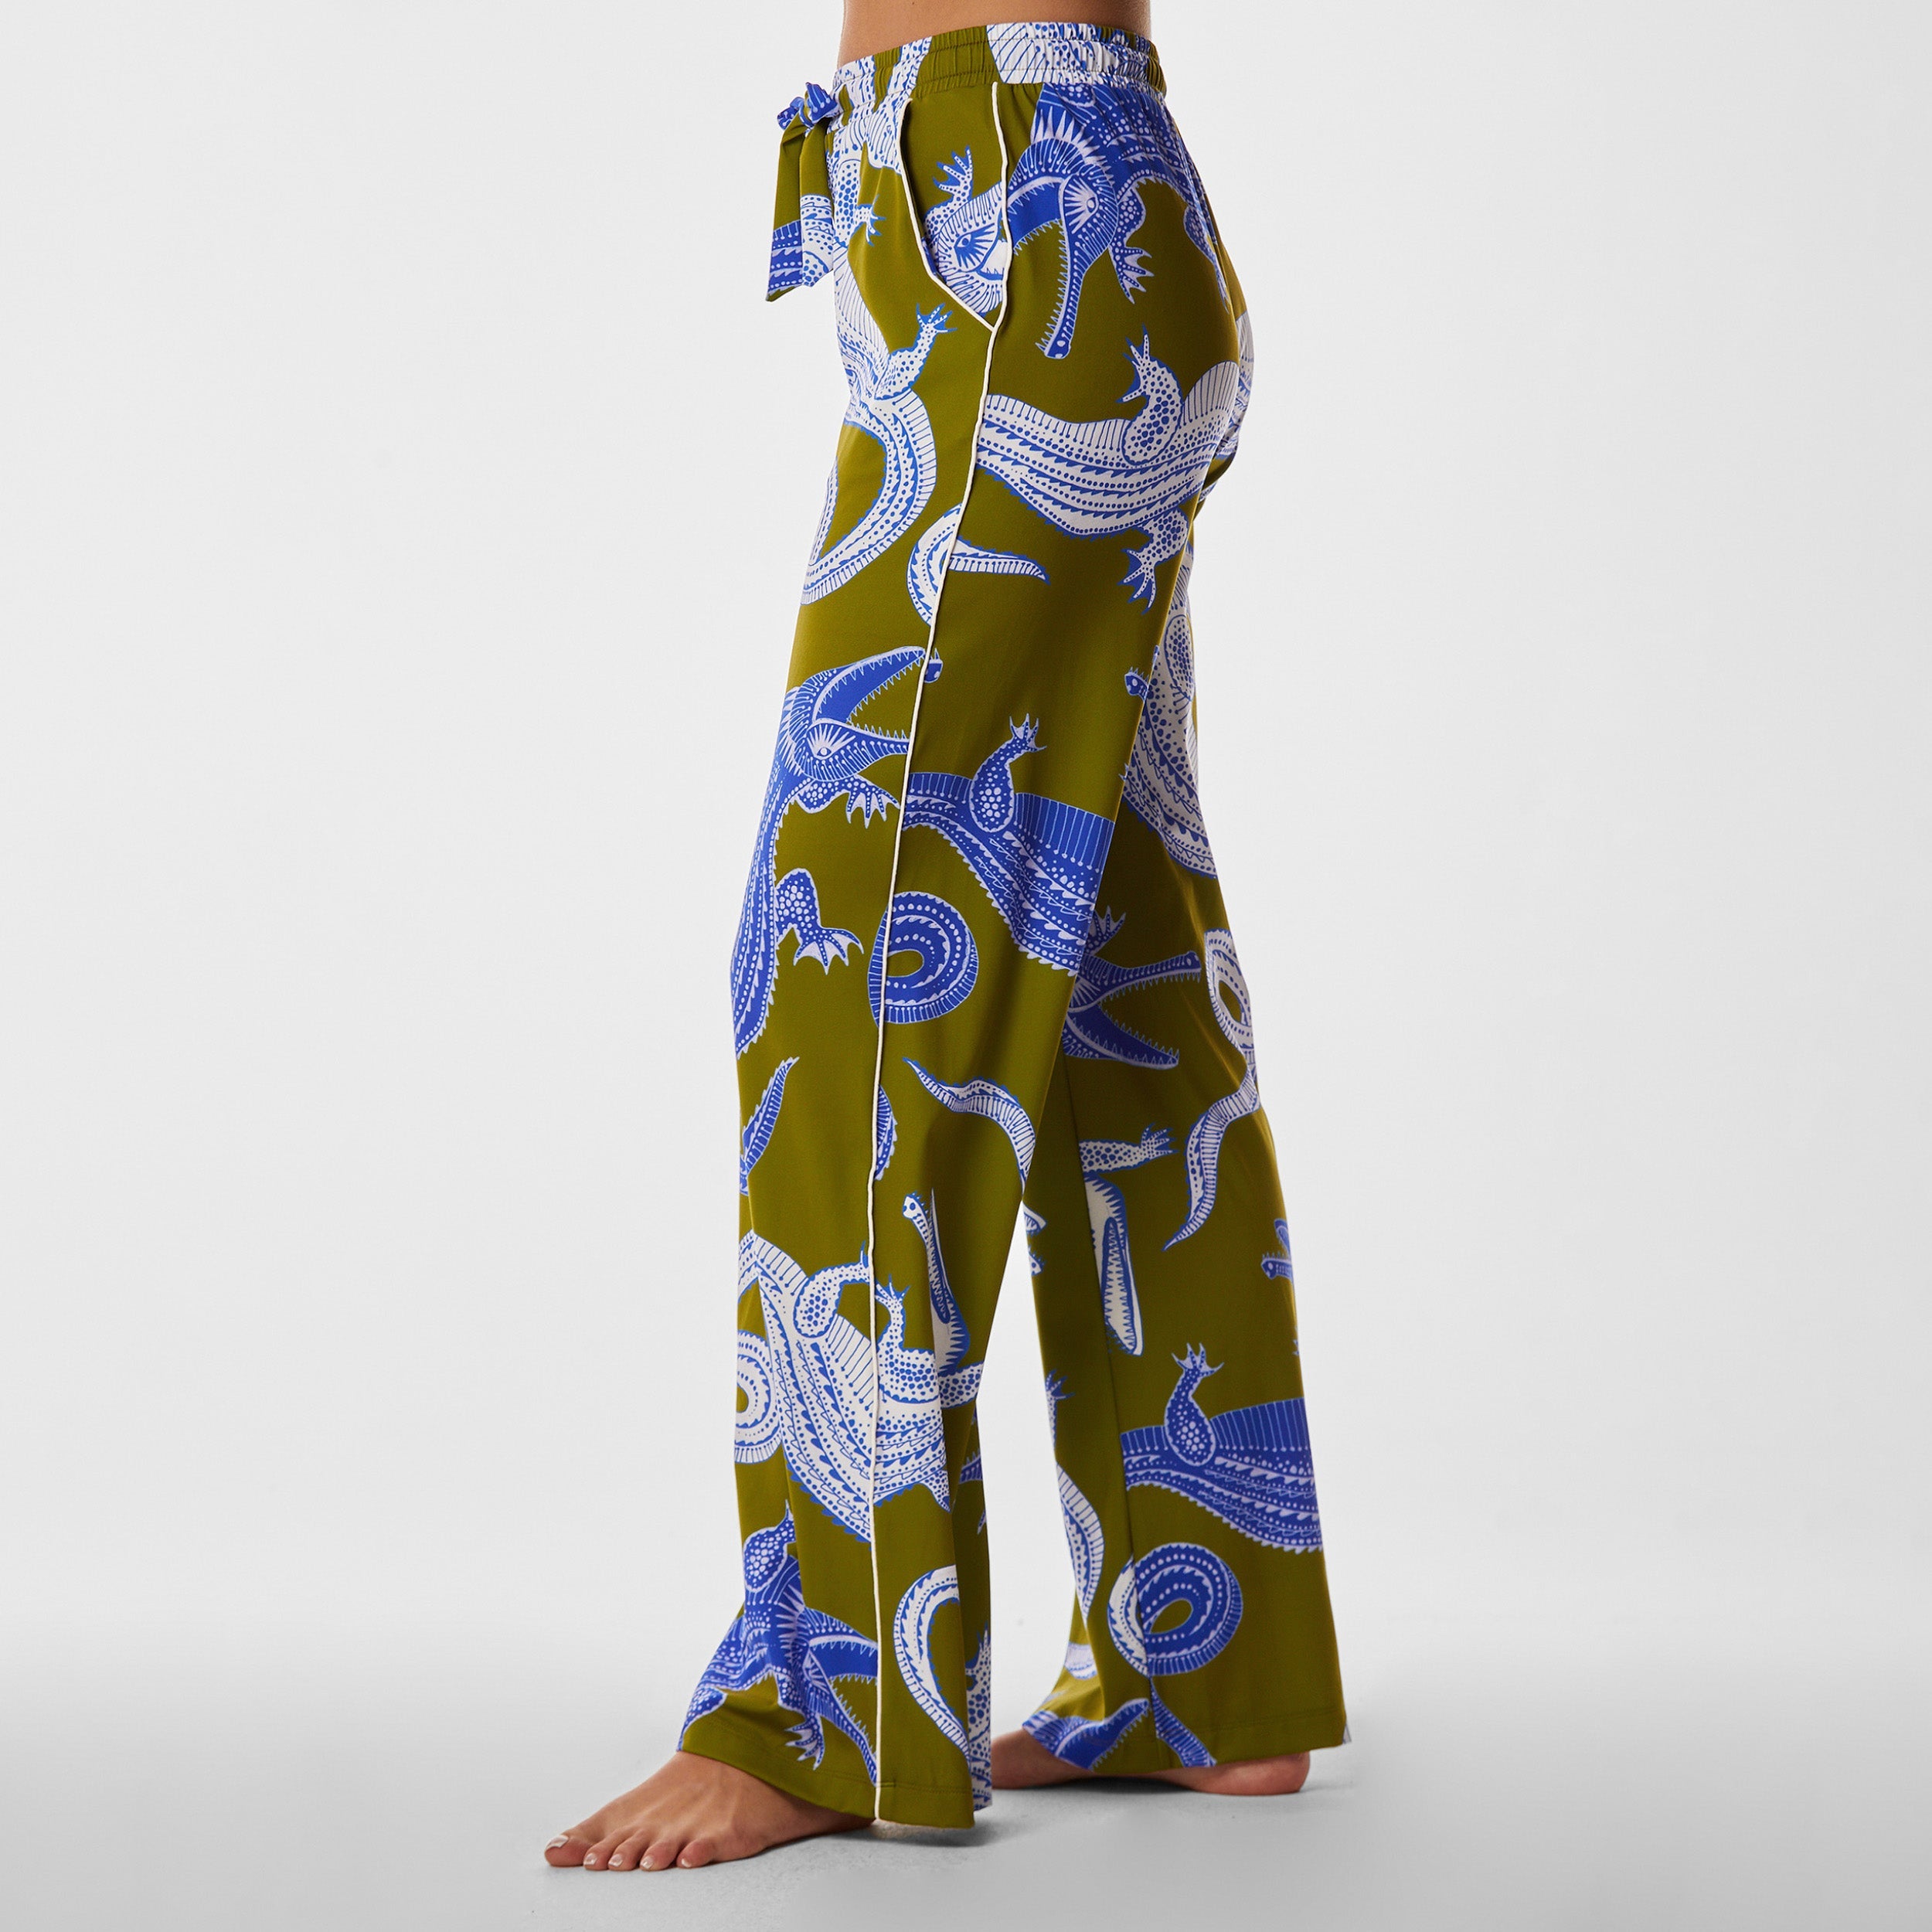 Side view of woman wearing breathable, relaxed and buttery smooth pajama pant featuring high-waist cut, side pockets, front tie and stunning Nile gator print.